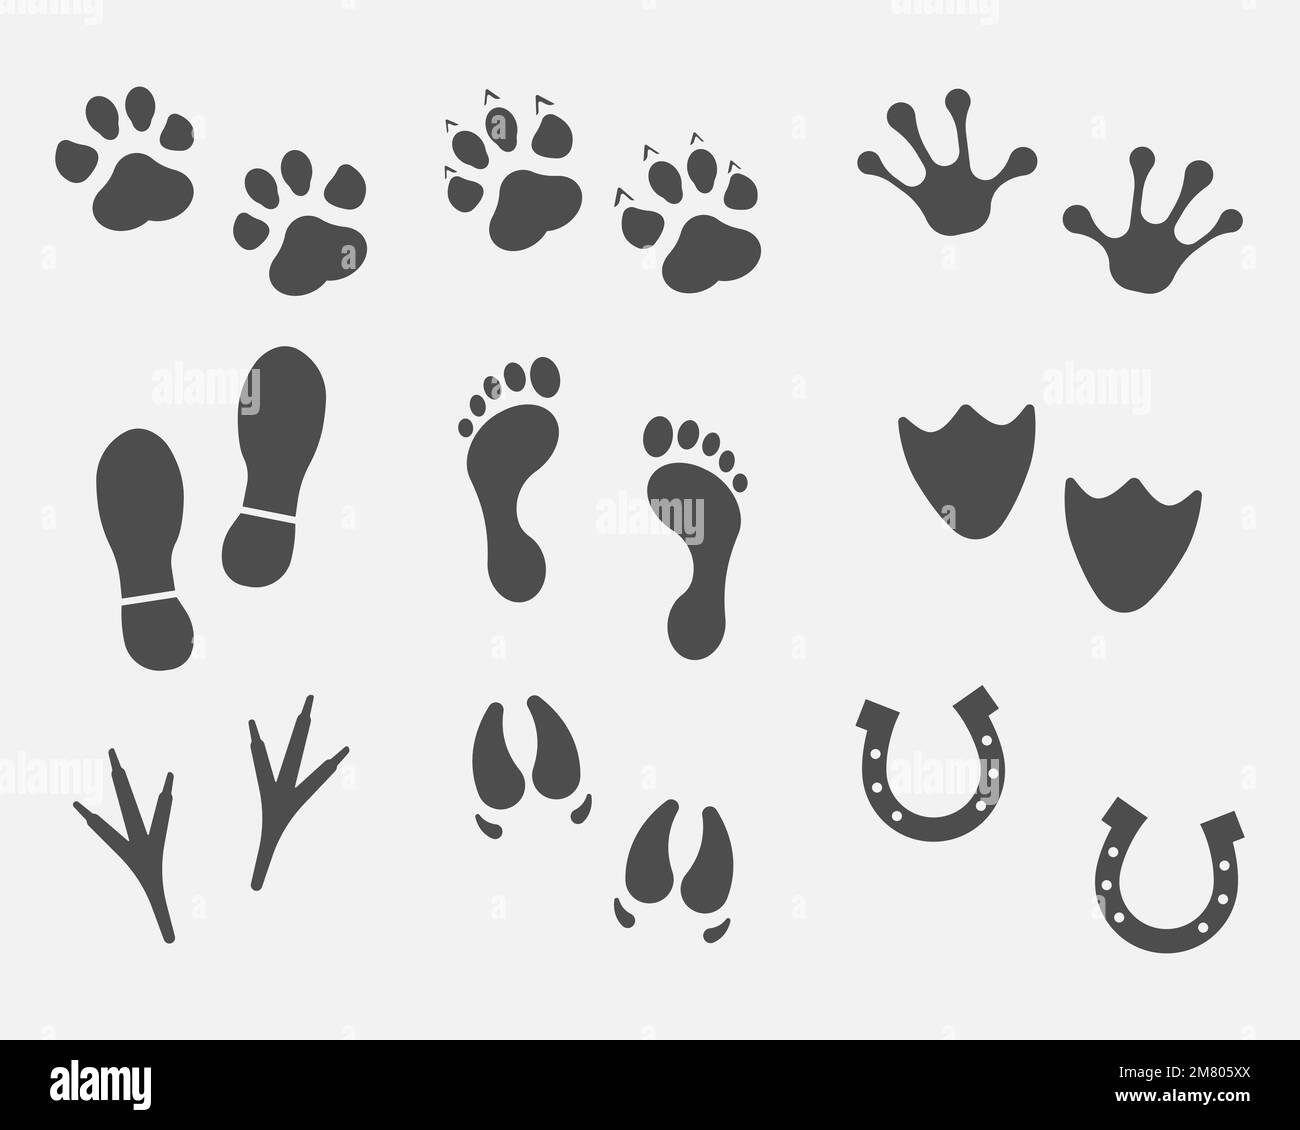 Black Different Animal and Bird Silhouettes Tracks Set isolated on white background. Vector illustration. Eps 10. Stock Vector